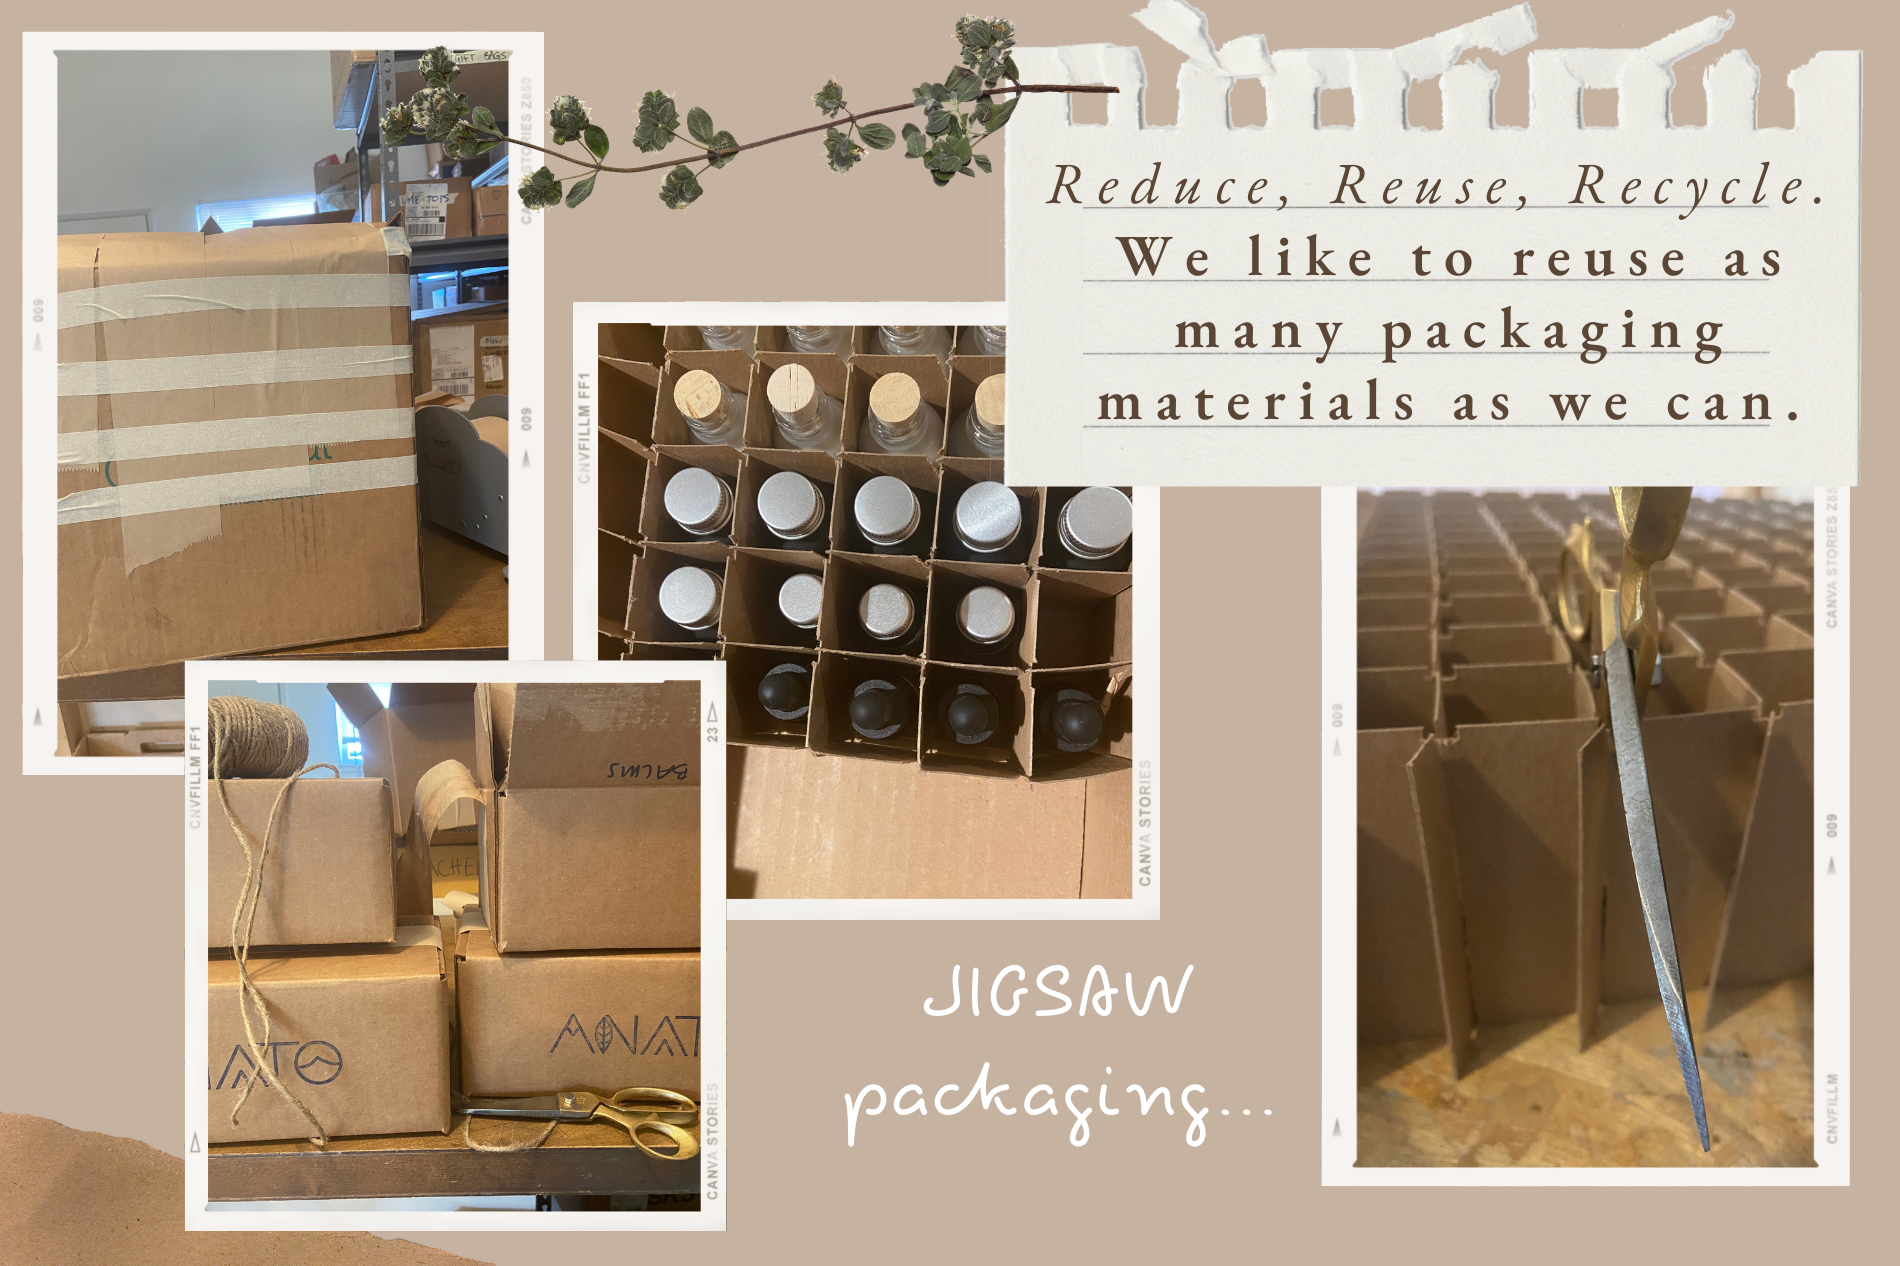 Reduce, Reuse, Recycle.  We like to reuse as many packaging materials as we can. Jigsaw packaging boxes and products!